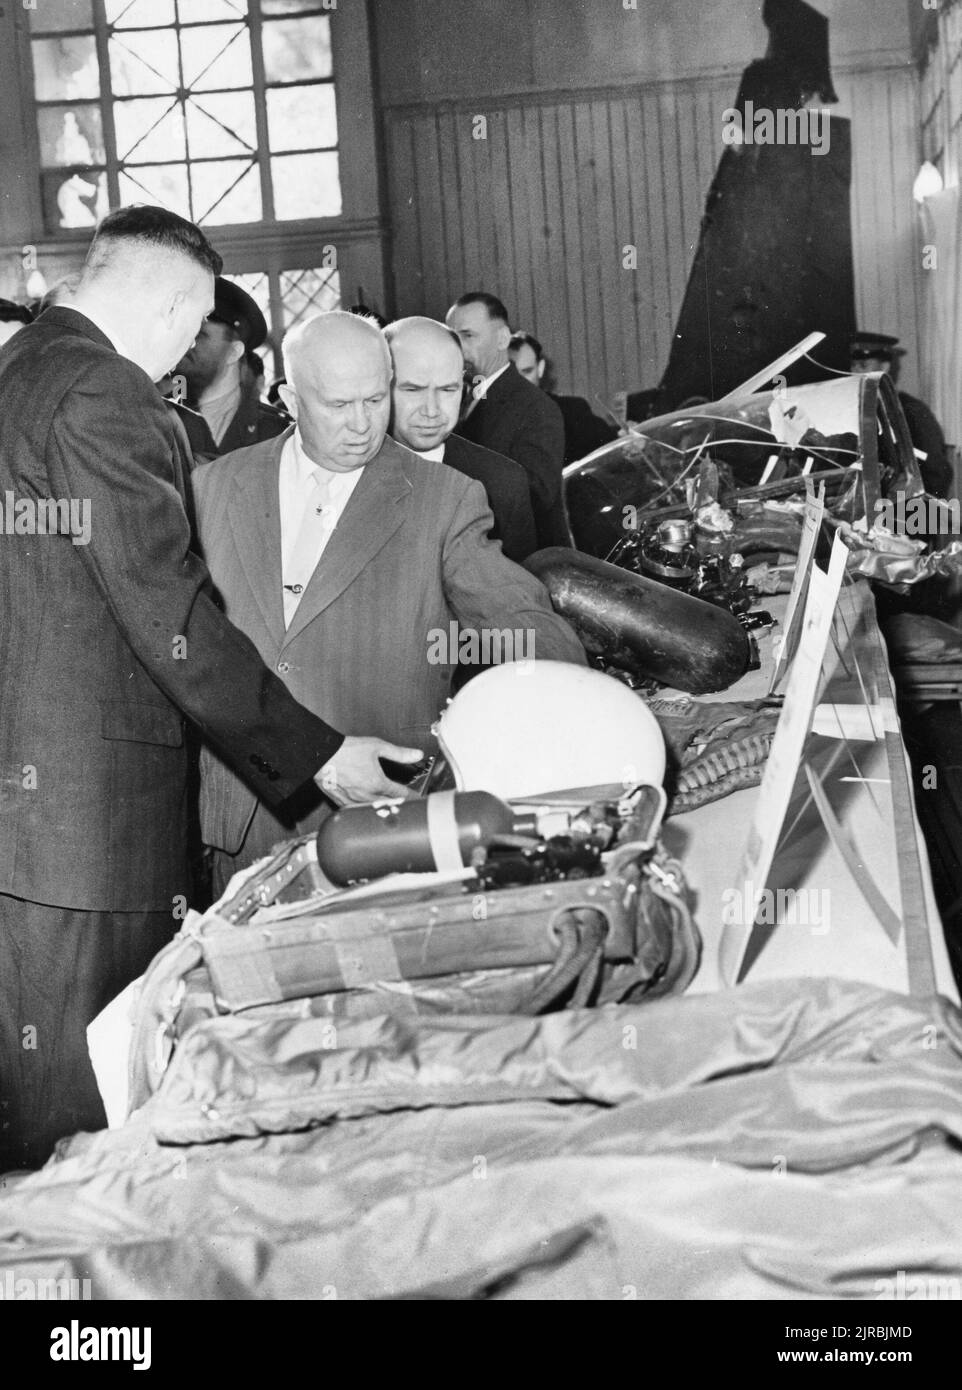 This photograph depicts Soviet Premier Nikita Krushchev viewing items recovered from the wreckage of the American U-2 spy plane Stock Photo